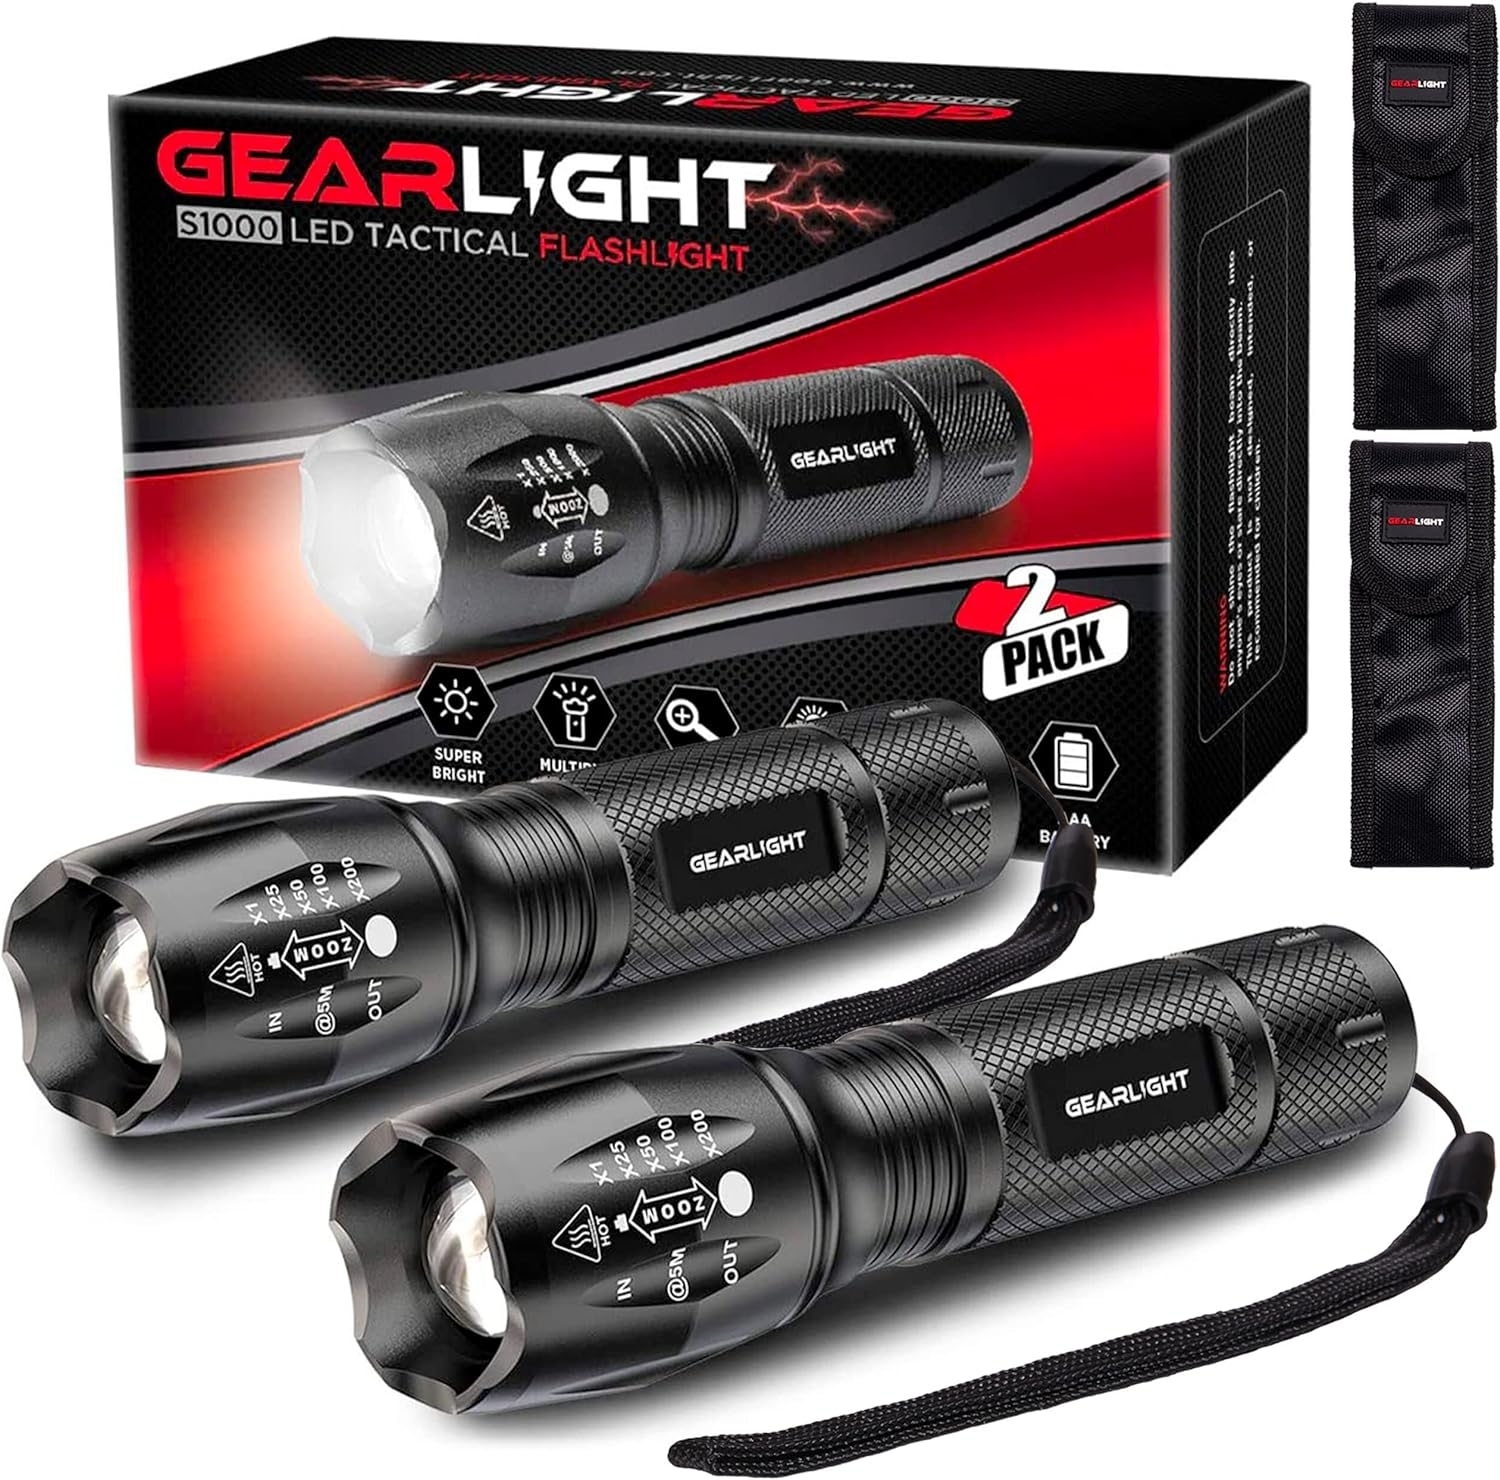 Two GearLight S1000 LED Tactical Flashlights with packaging, featuring multiple light modes and zoom functions. Comes in a 2-pack set